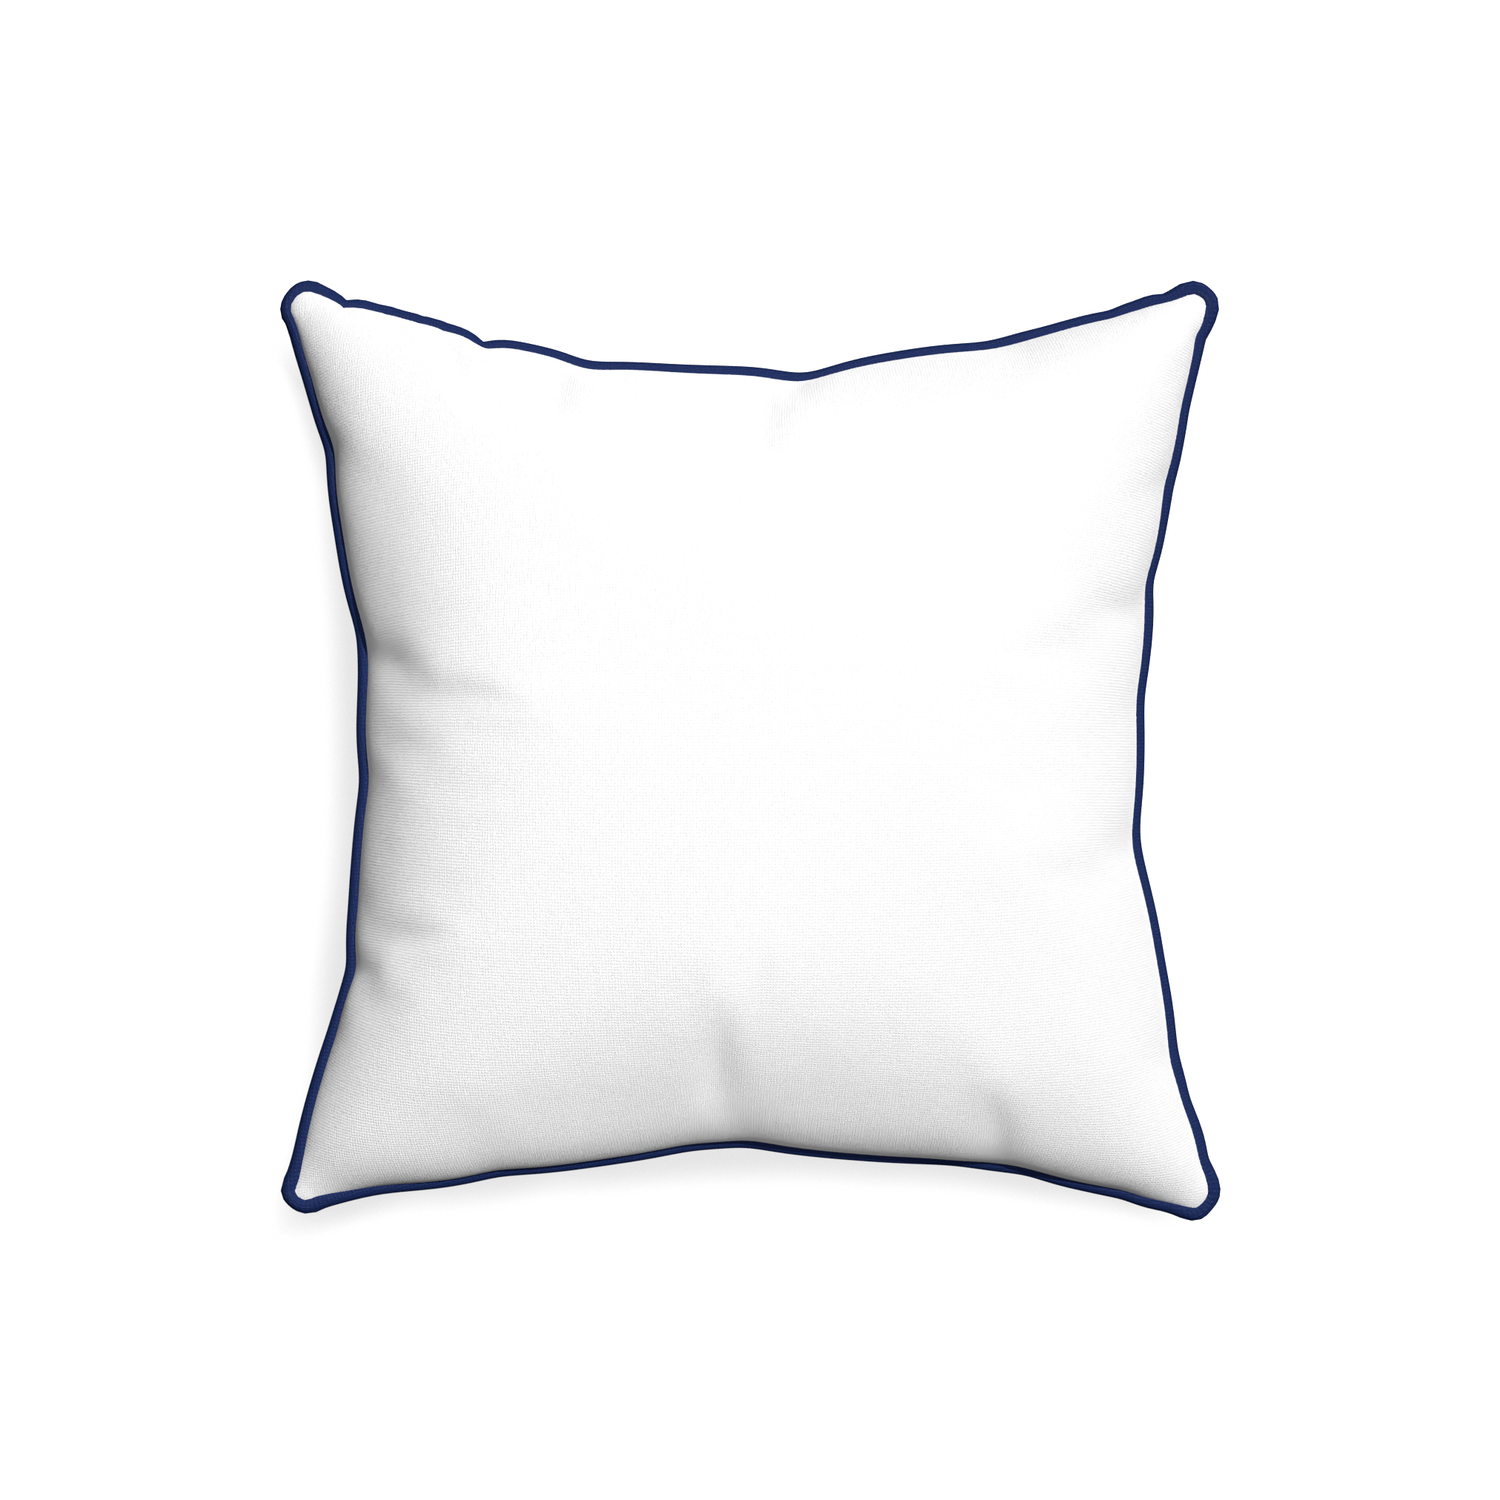 20-square snow custom pillow with midnight piping on white background